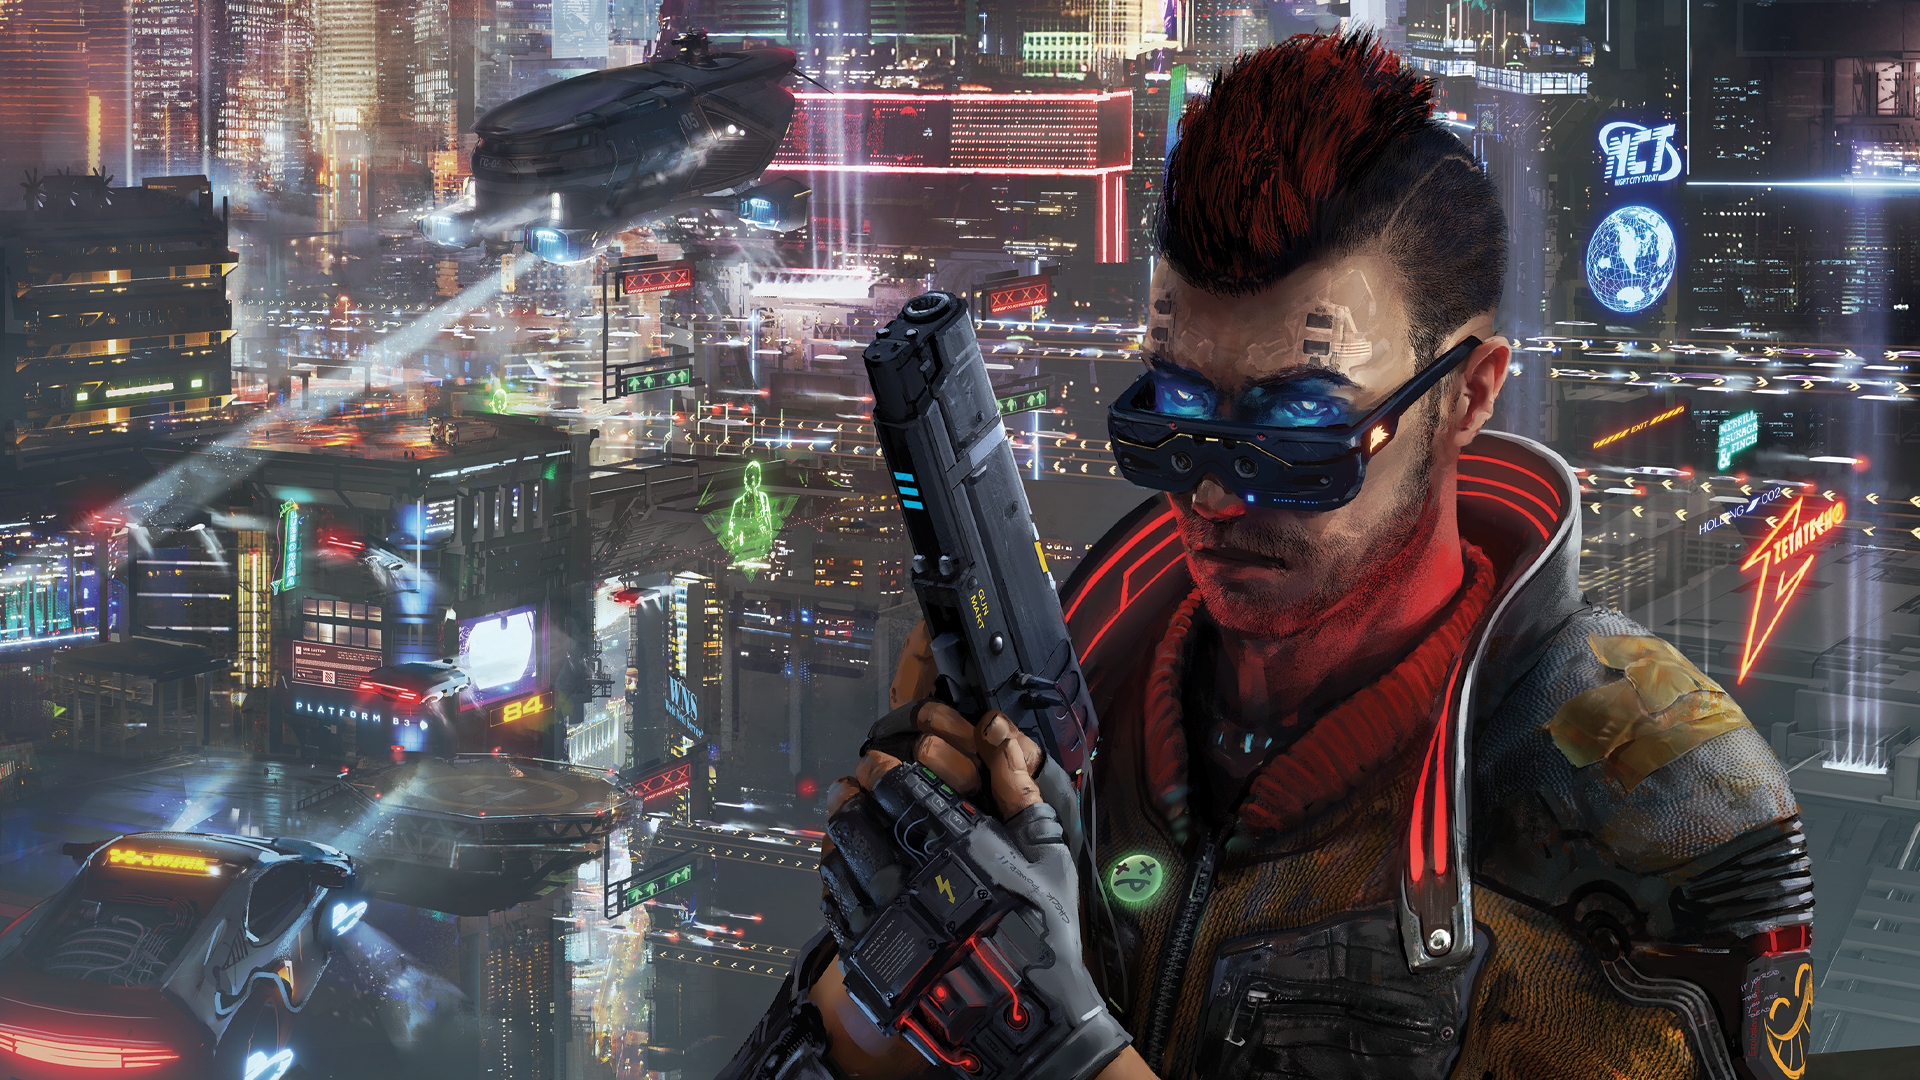 How To Play The Cyberpunk Red Tabletop Rpg A Beginner S Guide